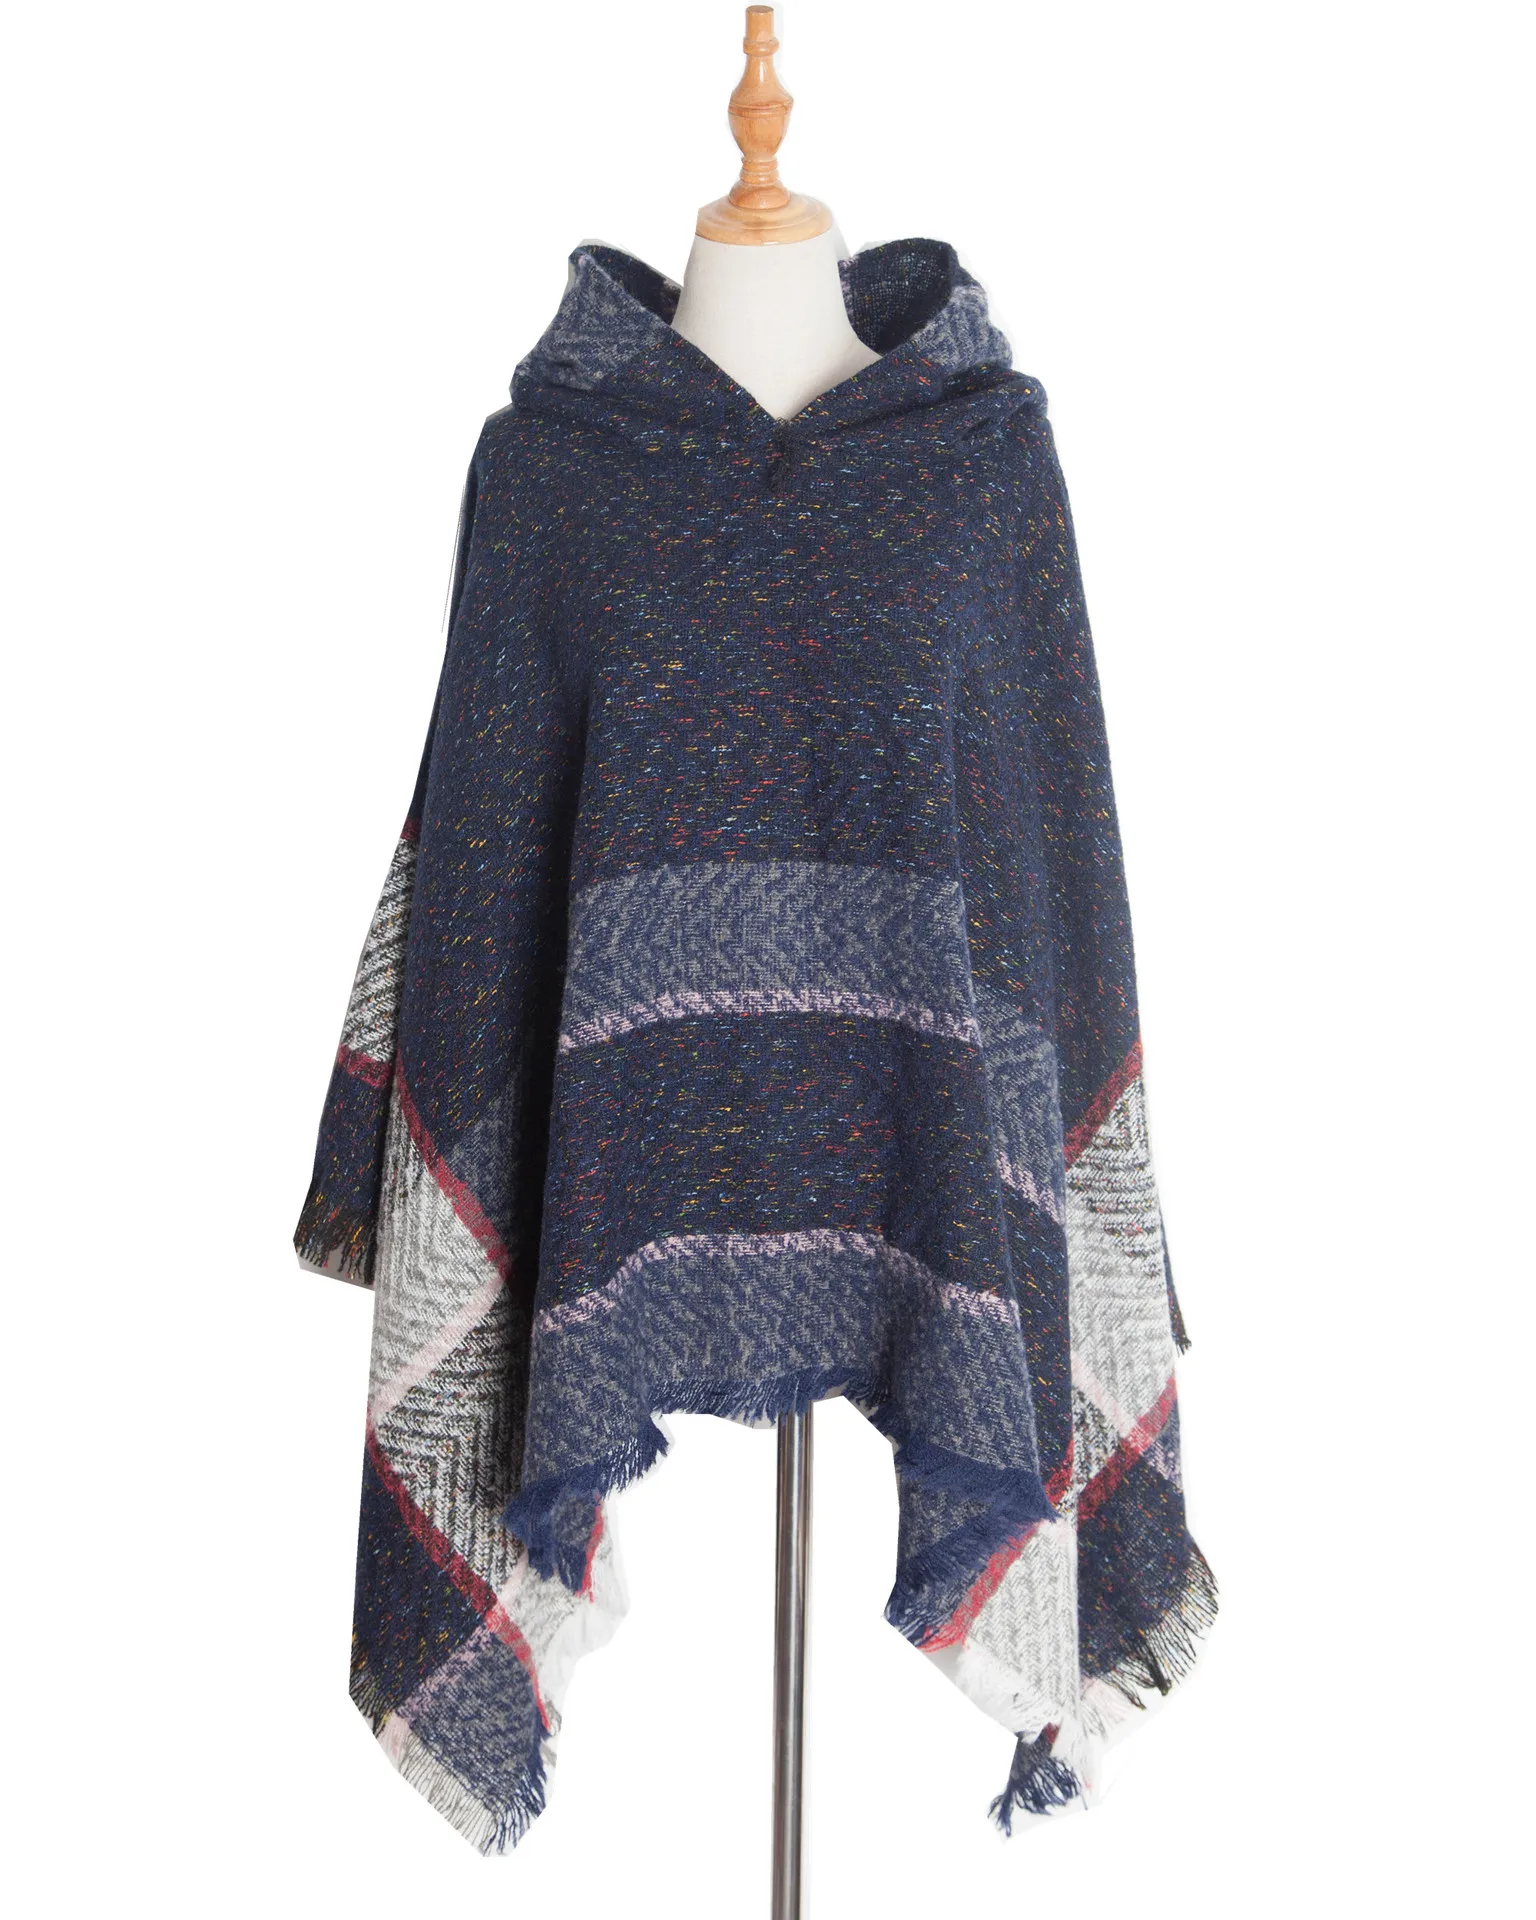 New Autumn Winter Fishbone Pattern Women's Hooded Cape Pullover Cape Women Poncho Lady Capes Navy Cloaks autumn winter new style color contrast striped national style tassel pullover cloak poncho lady capes black cloaks